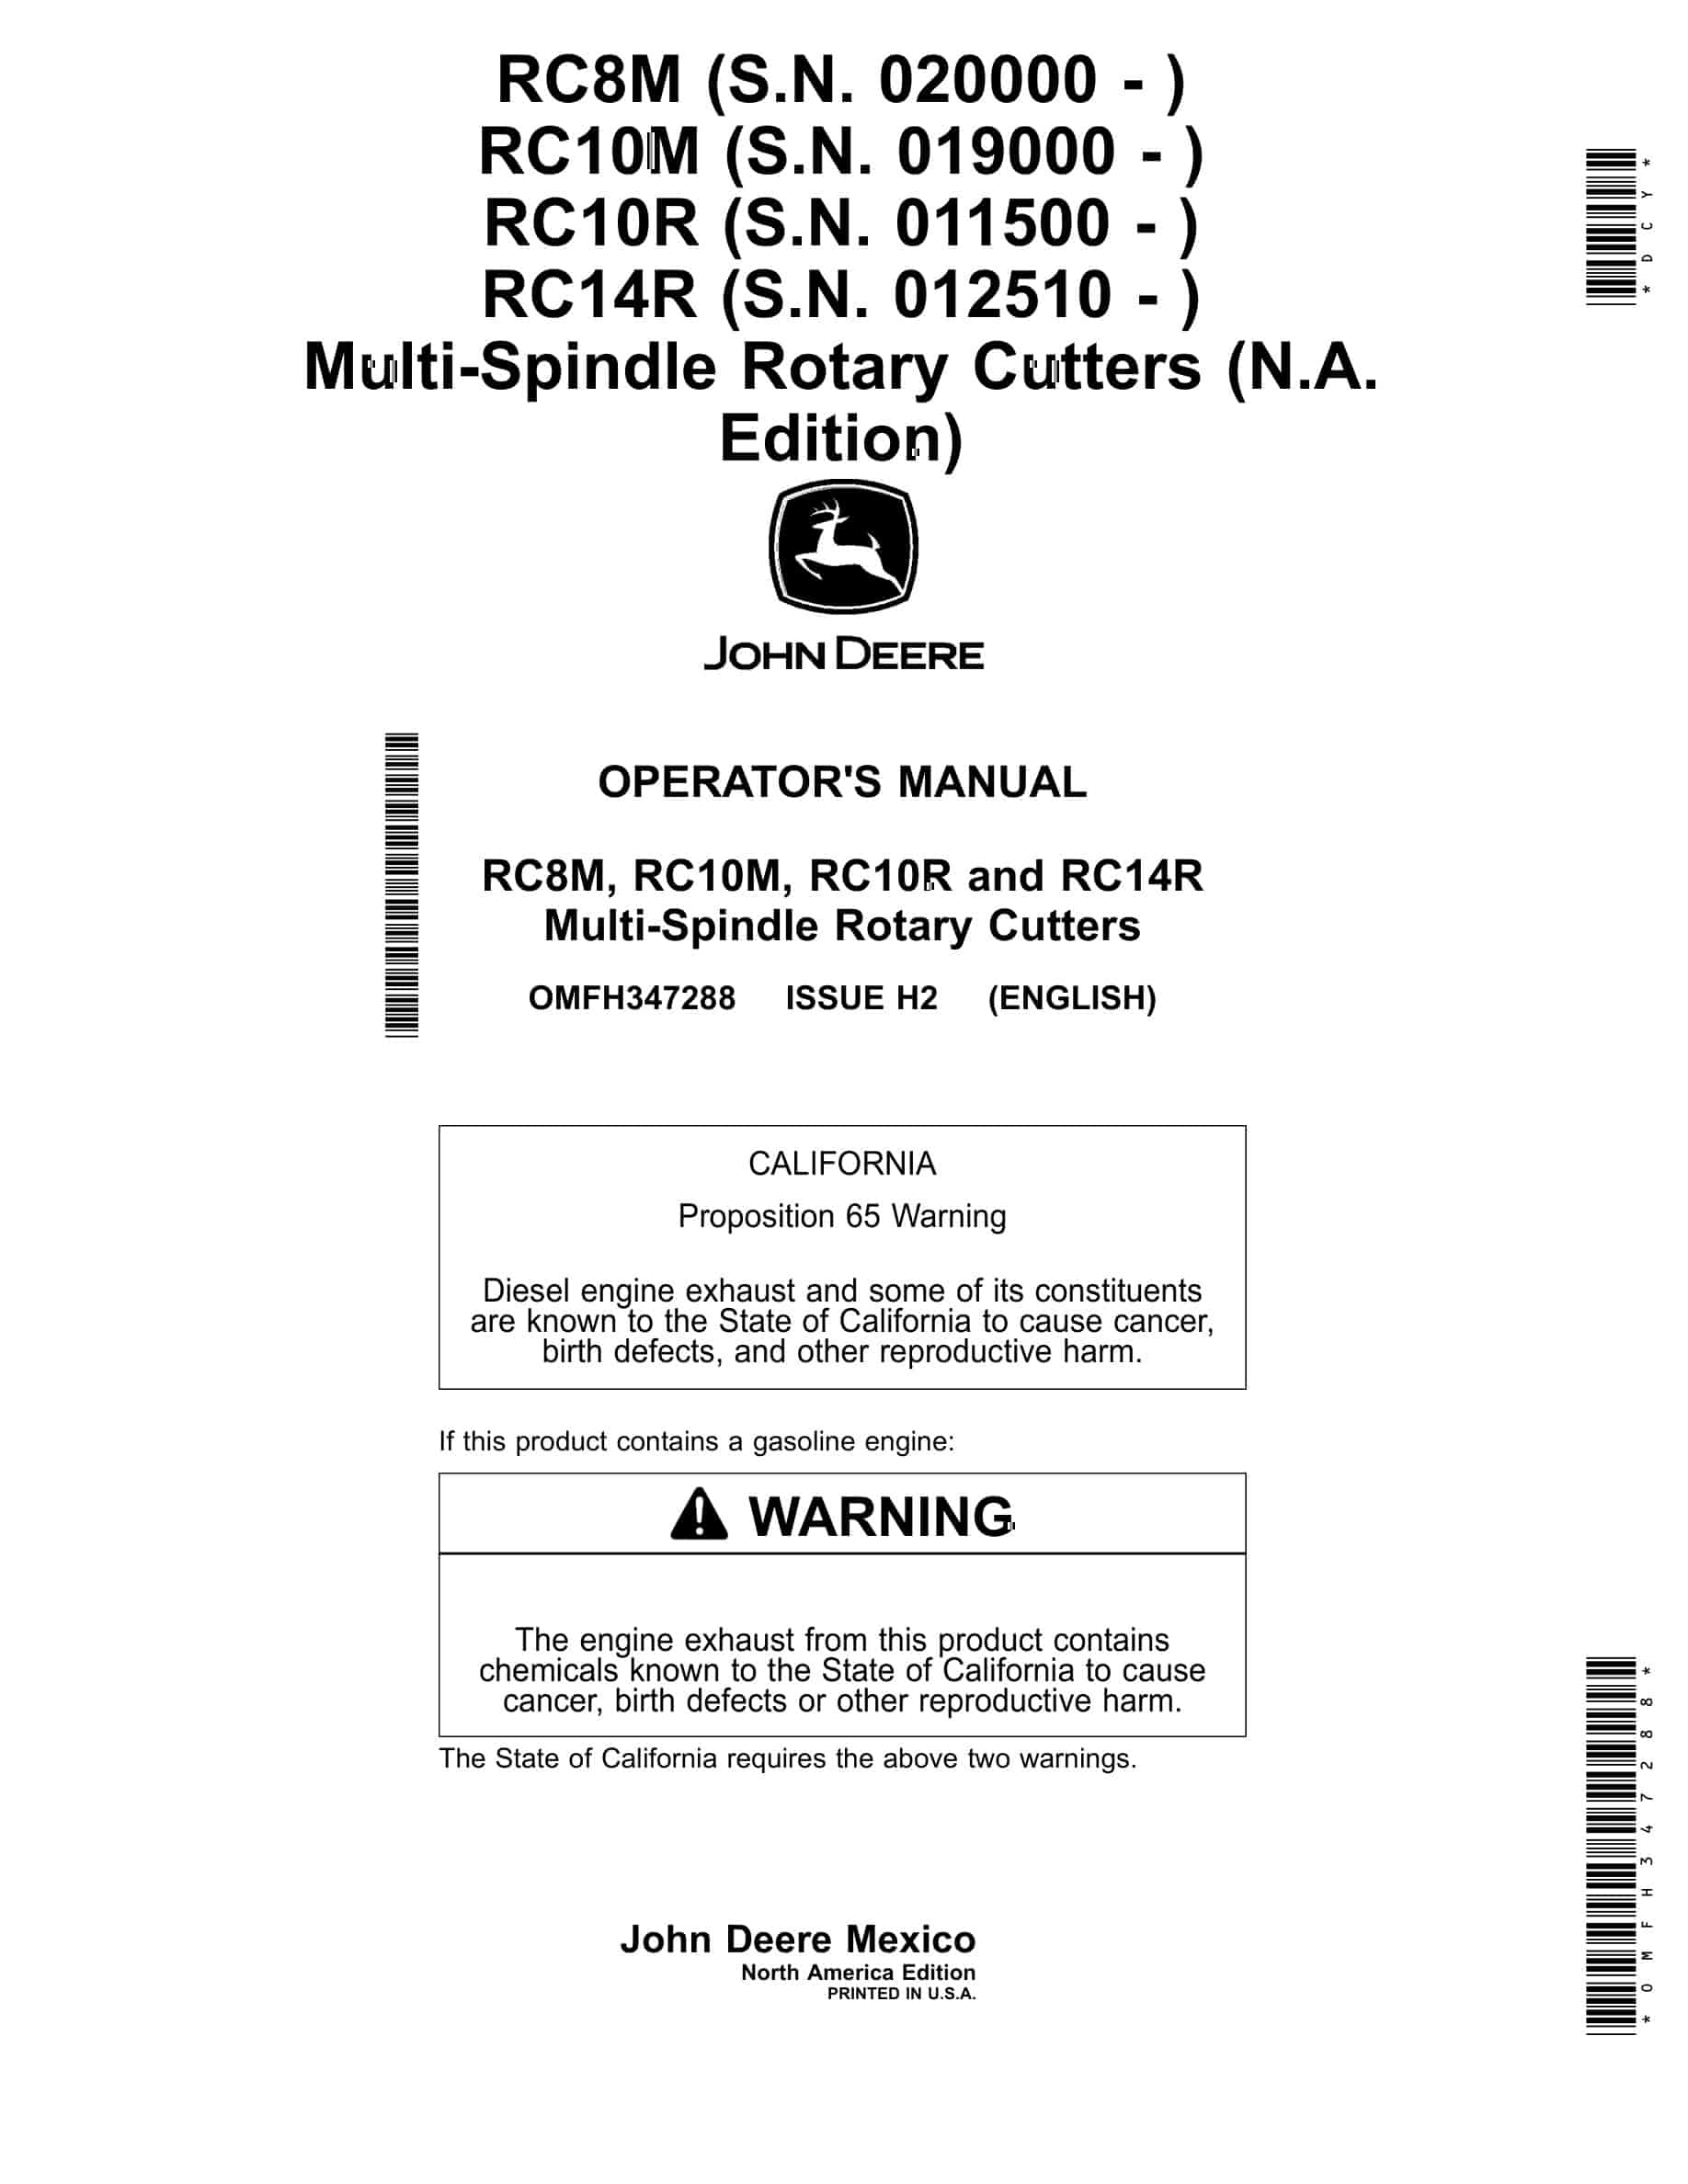 John Deere RC8M, RC10M, RC10R and RC14R Multi-Spindle Rotary Cutter Operator Manual OMFH347288-1